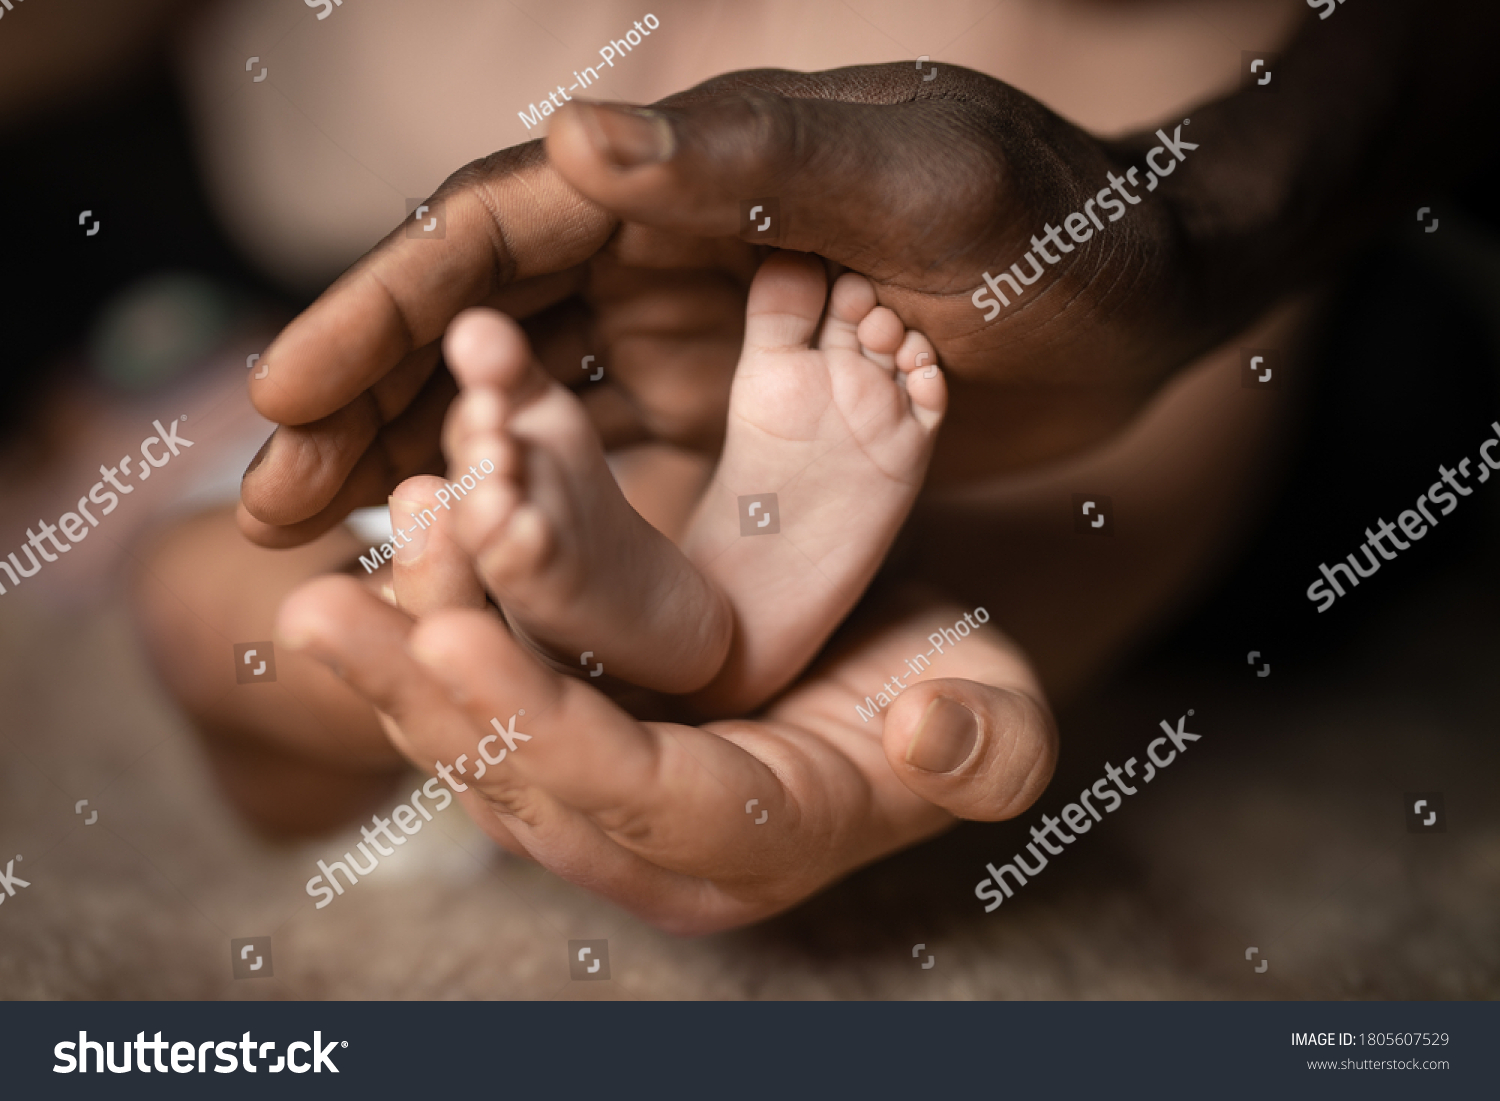 interracial family holding baby feet in hands mixed by black and white skin color #1805607529